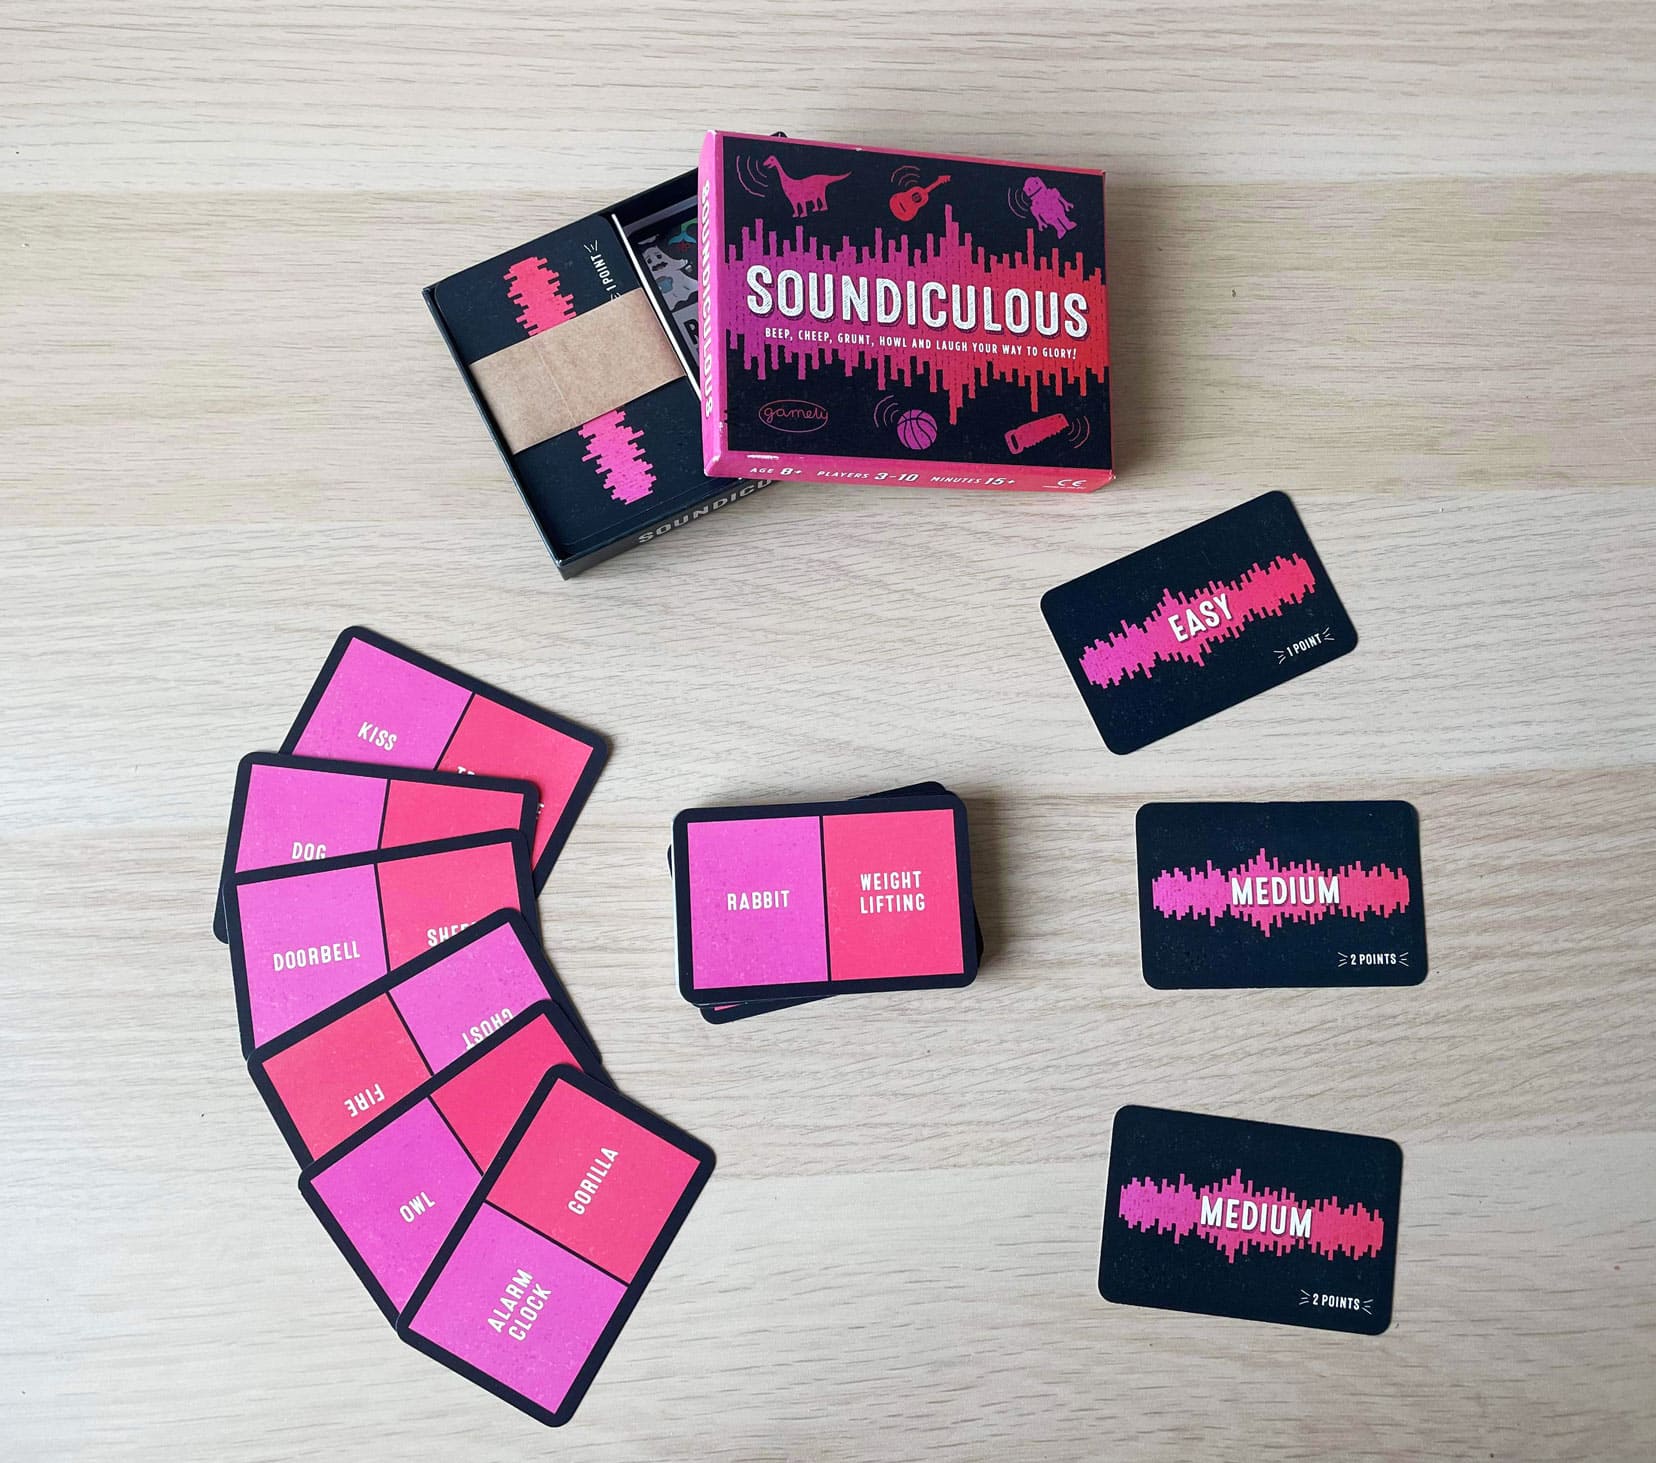 Pink and black cards with various words on as part of the Soundiculous travel game